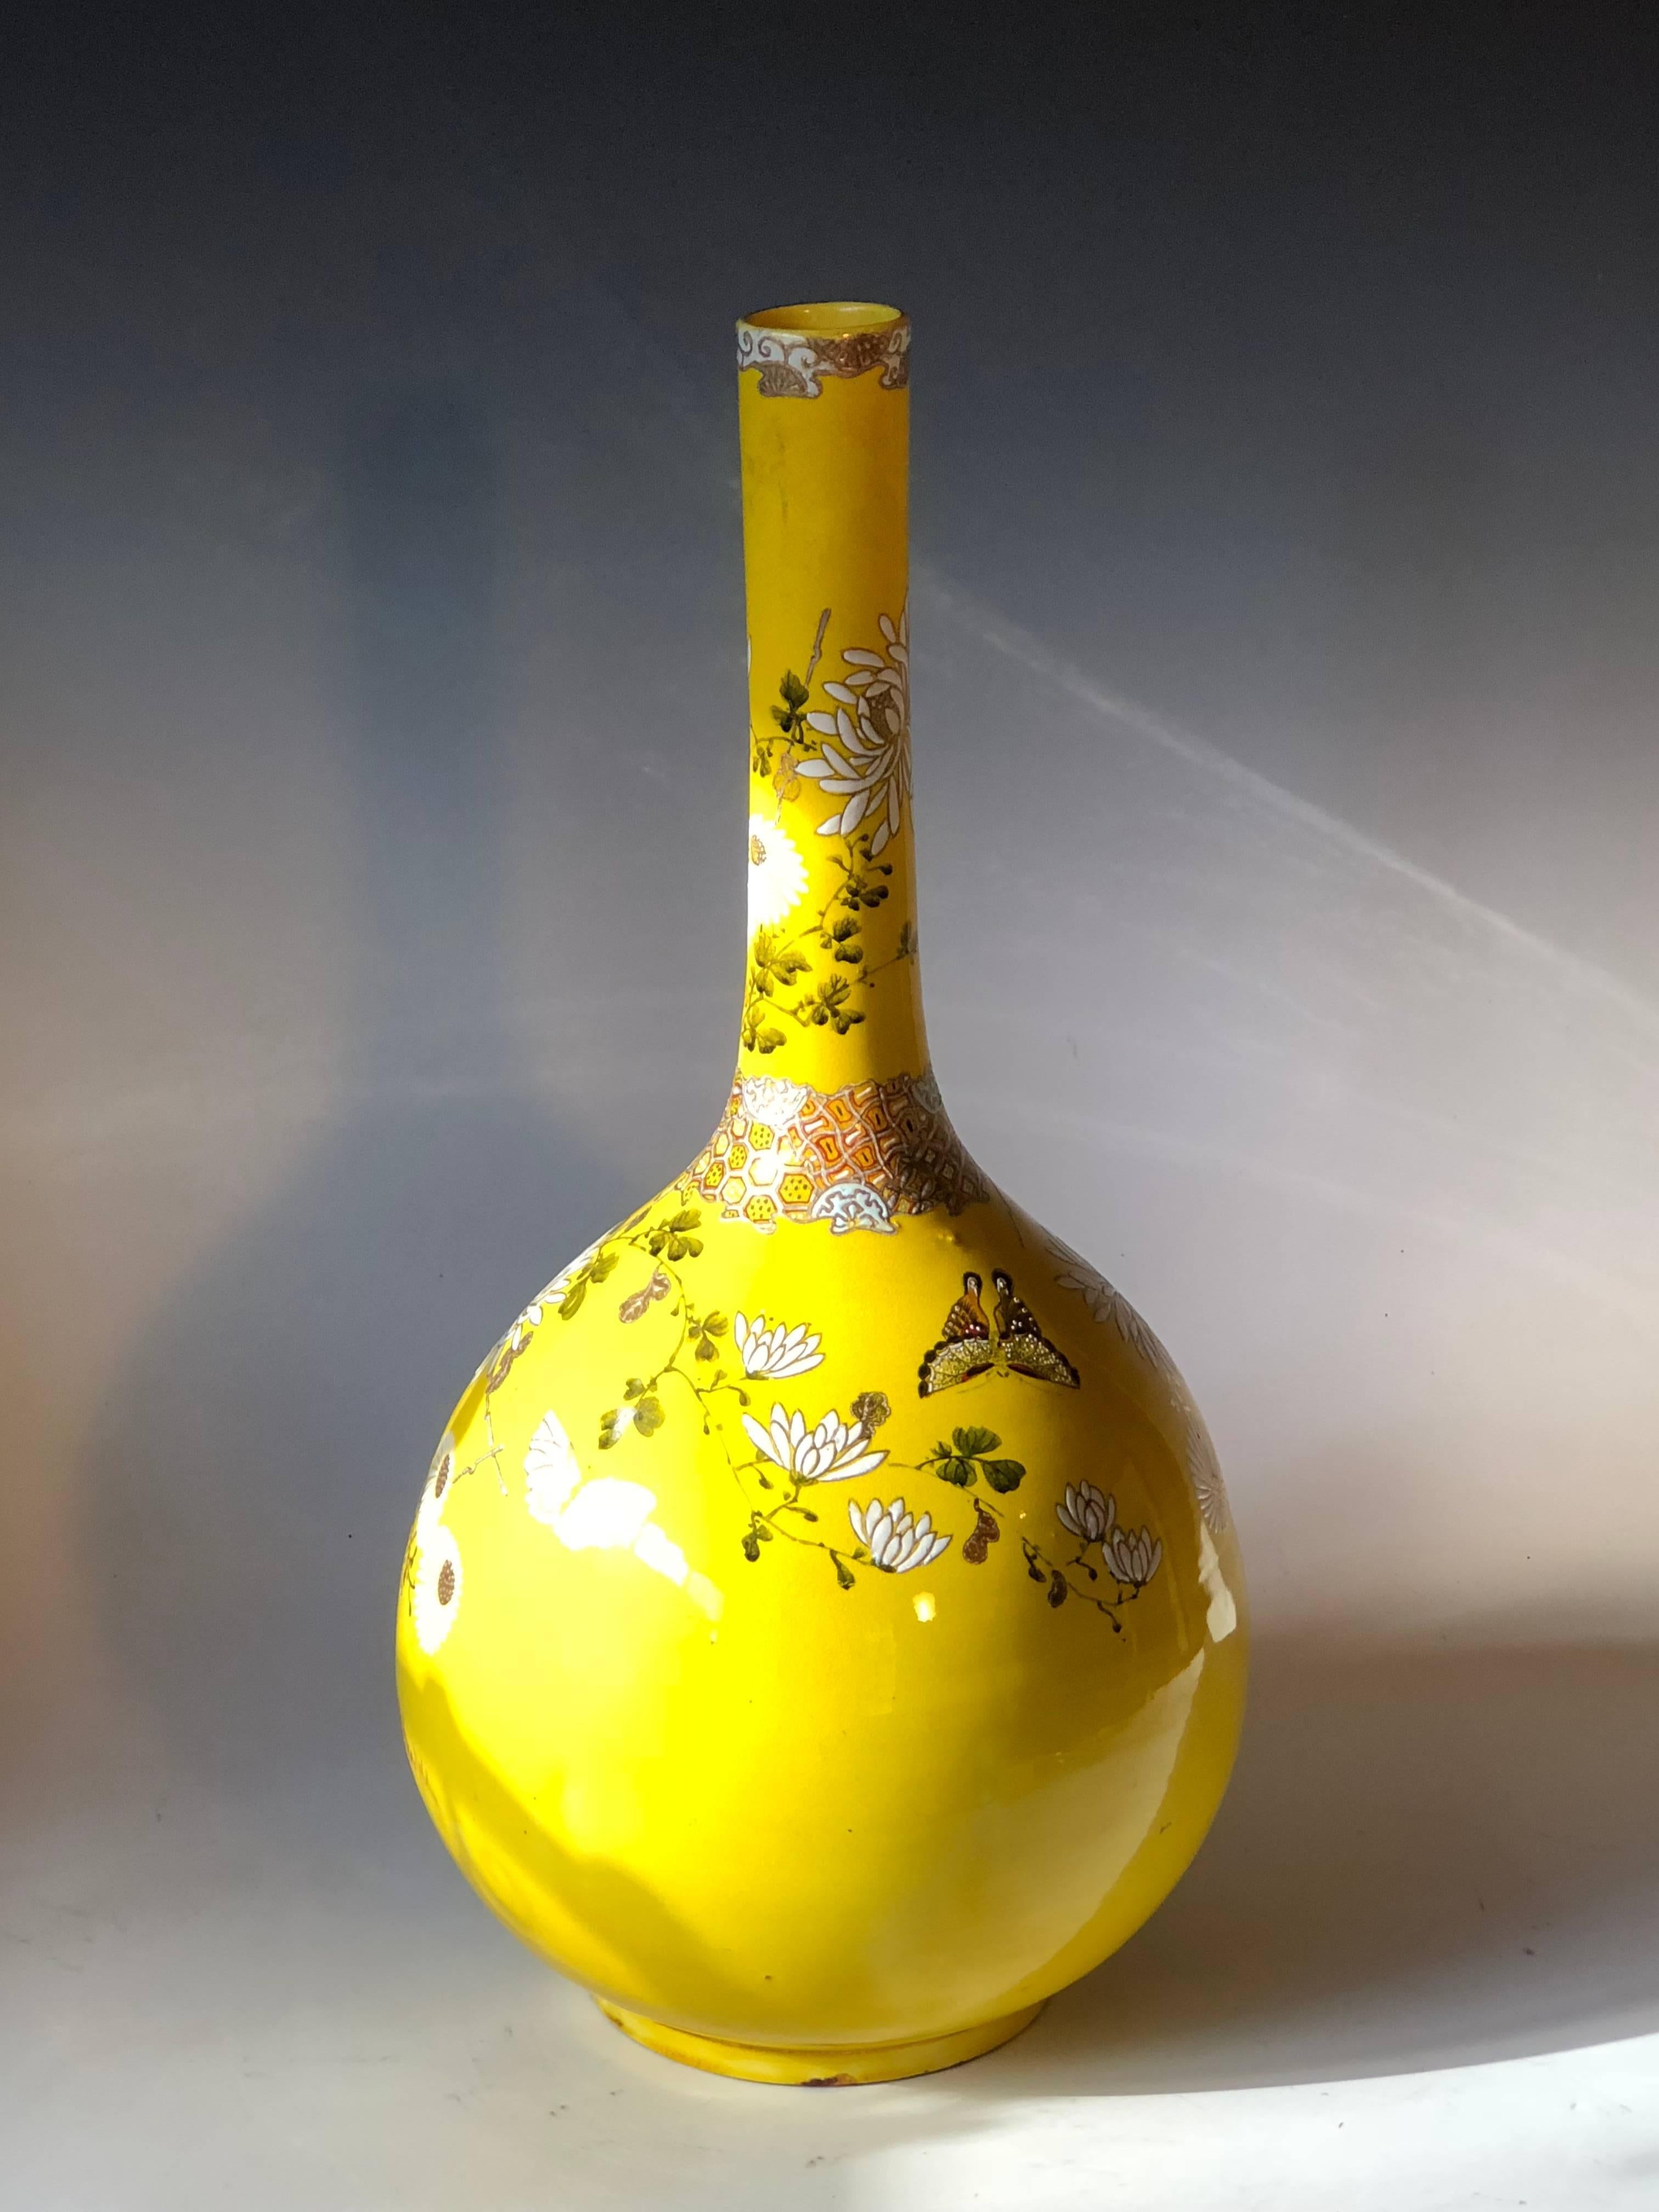 Antique Satsuma bottle vase decorated with enameled chrysanthemums, peonies, and butterflies on an electric yellow crackle glaze ground. From the city of Kyoto, circa 1910. Measures: 18